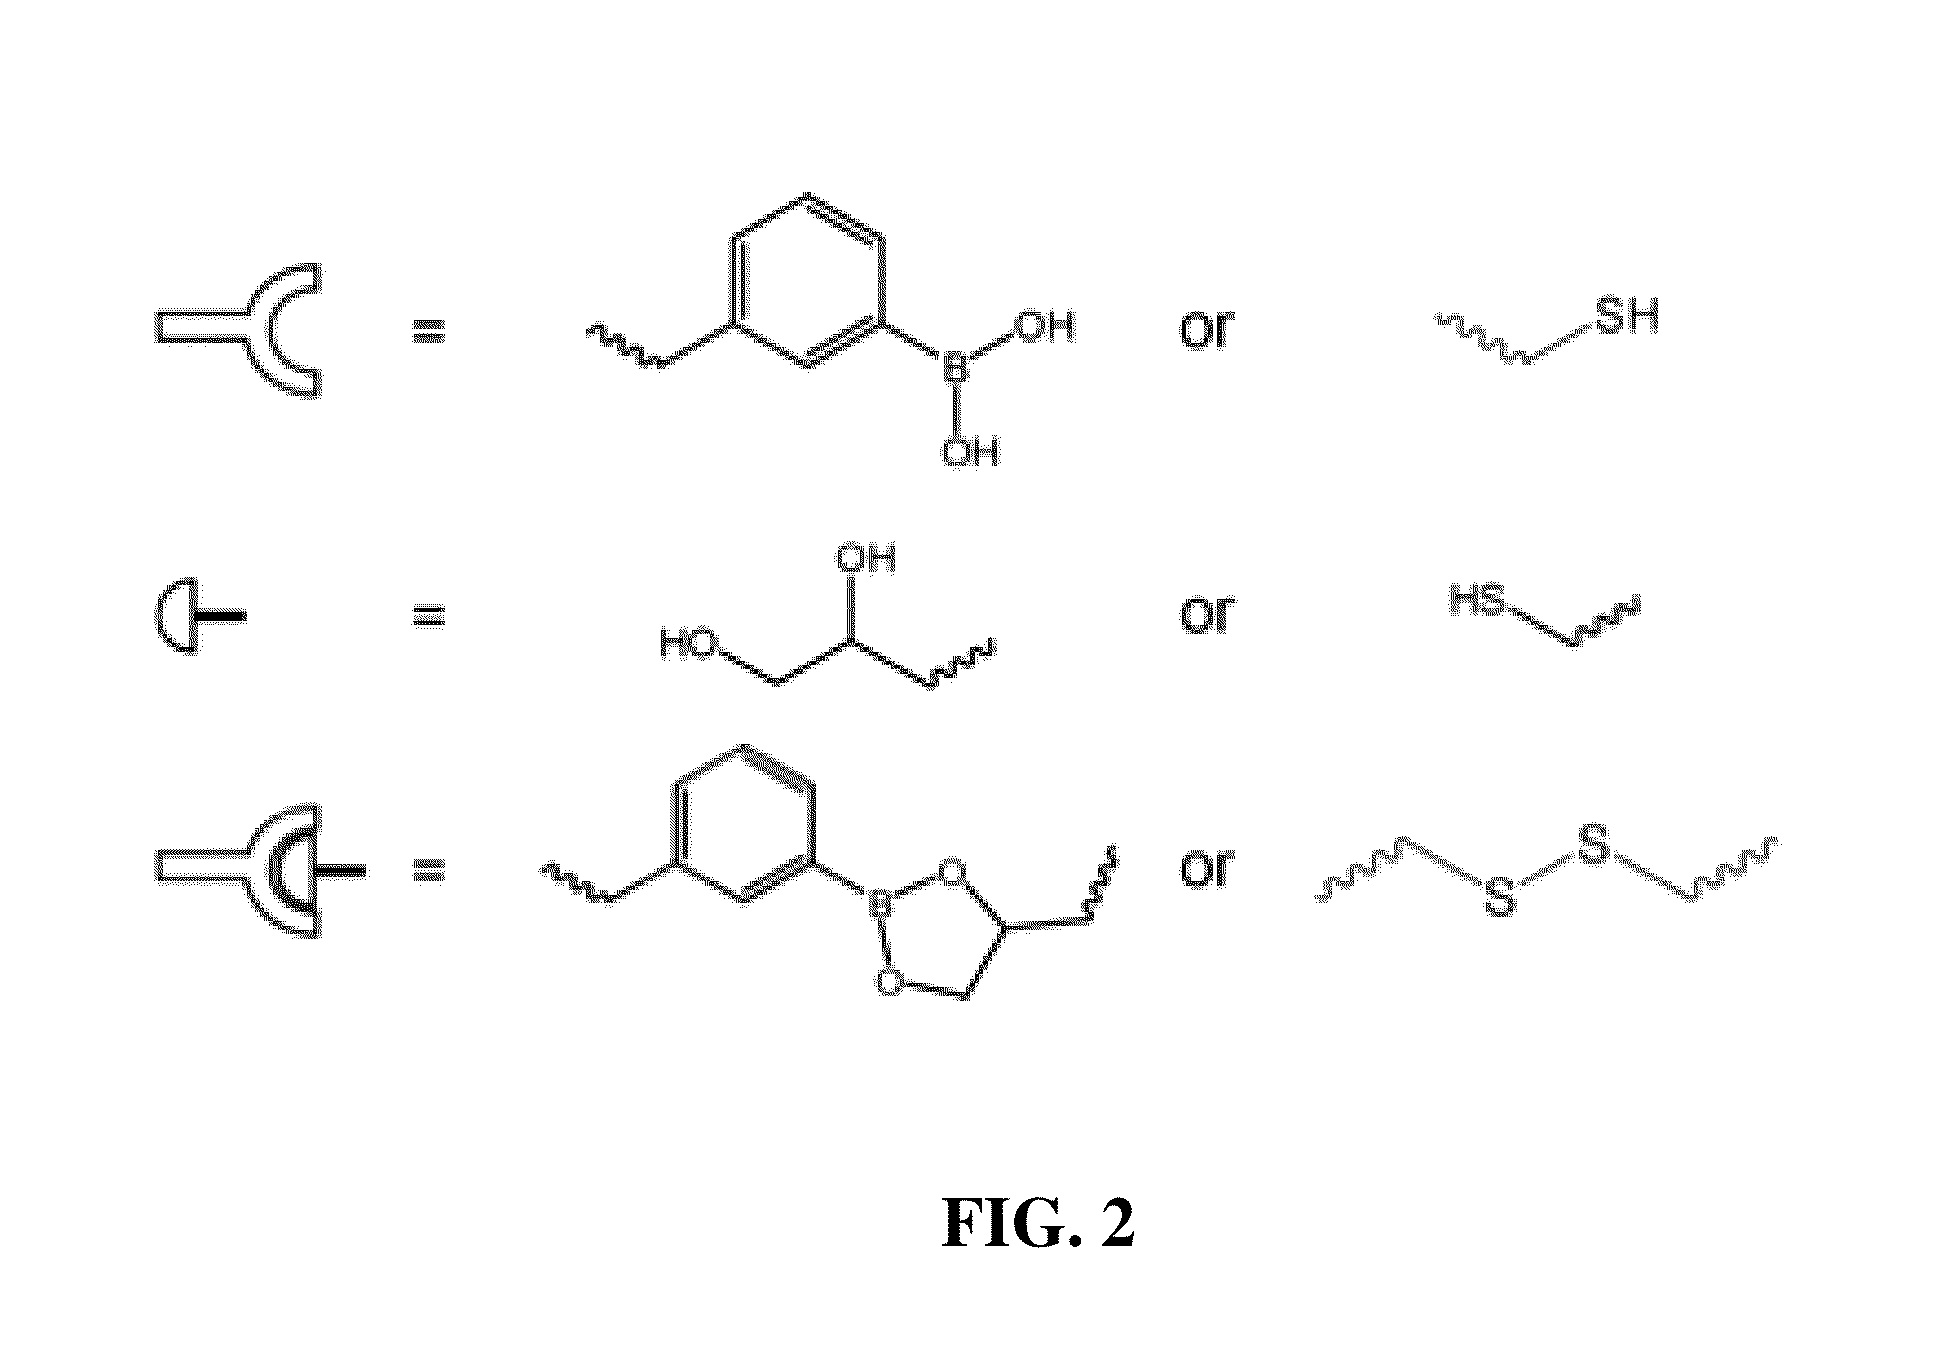 Polymers prepared using smart templates